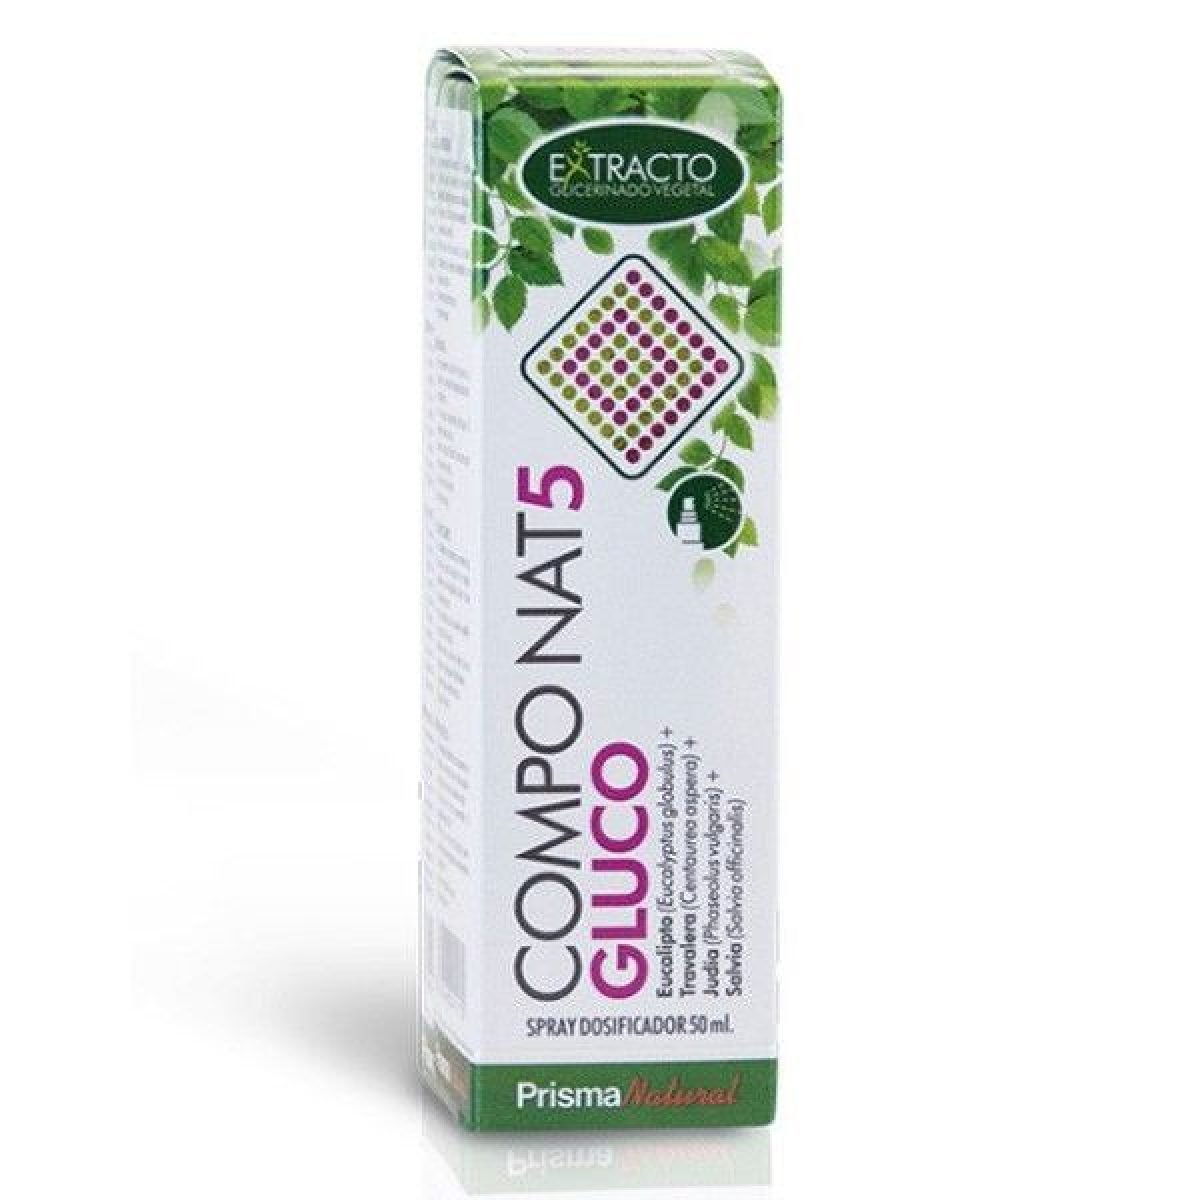 Buy Compo nat 5 gluco - 50ml spray price  in the USA and Washington